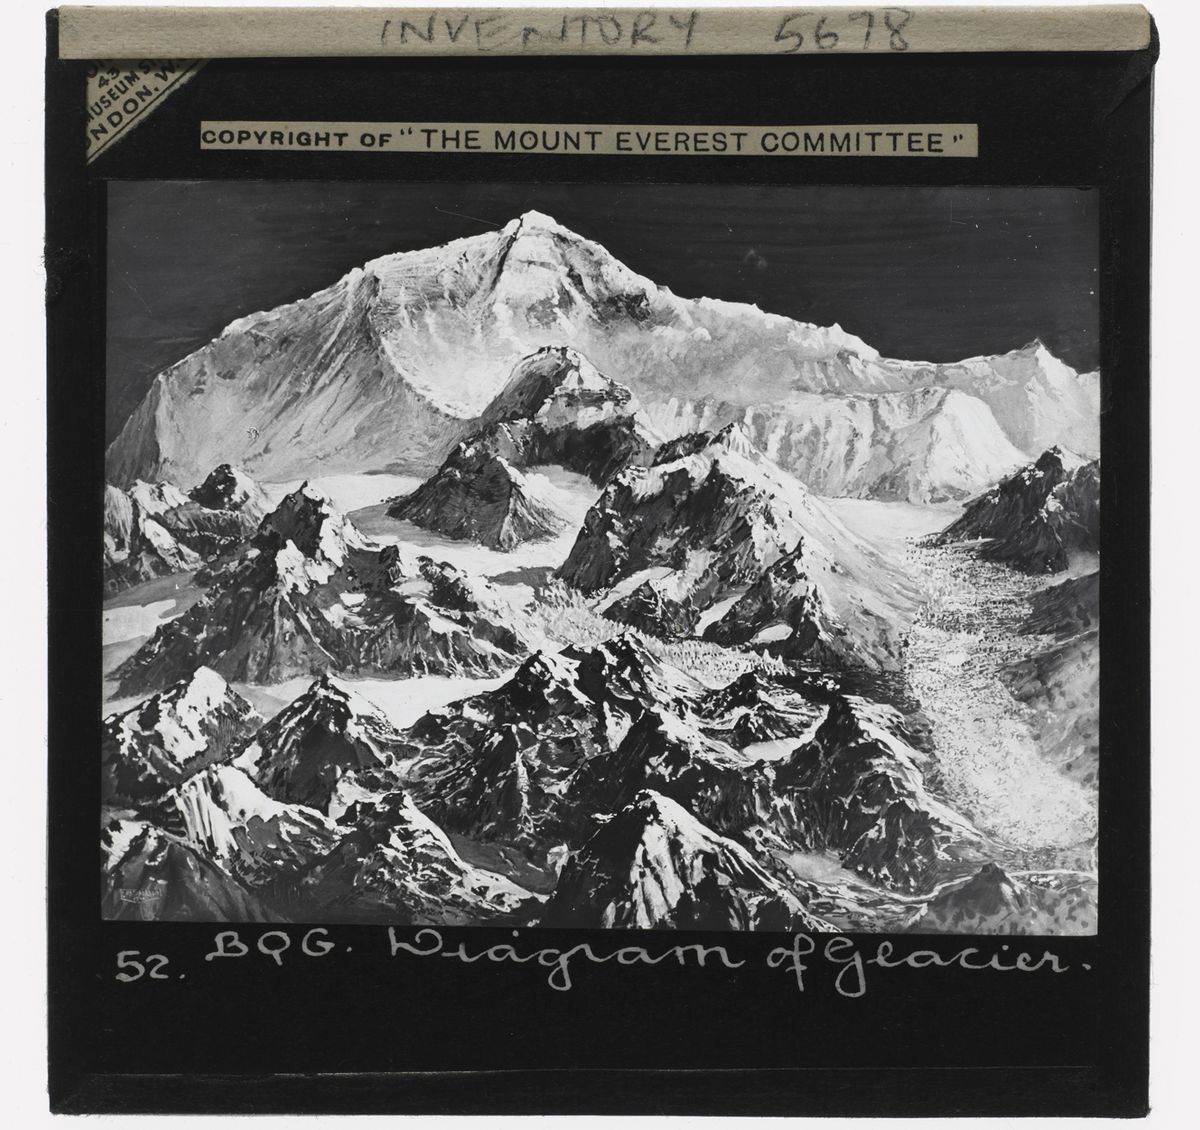 A magic-lantern slide from a 1921 expedition to Mount Everest © The RPS Collection at the V&A